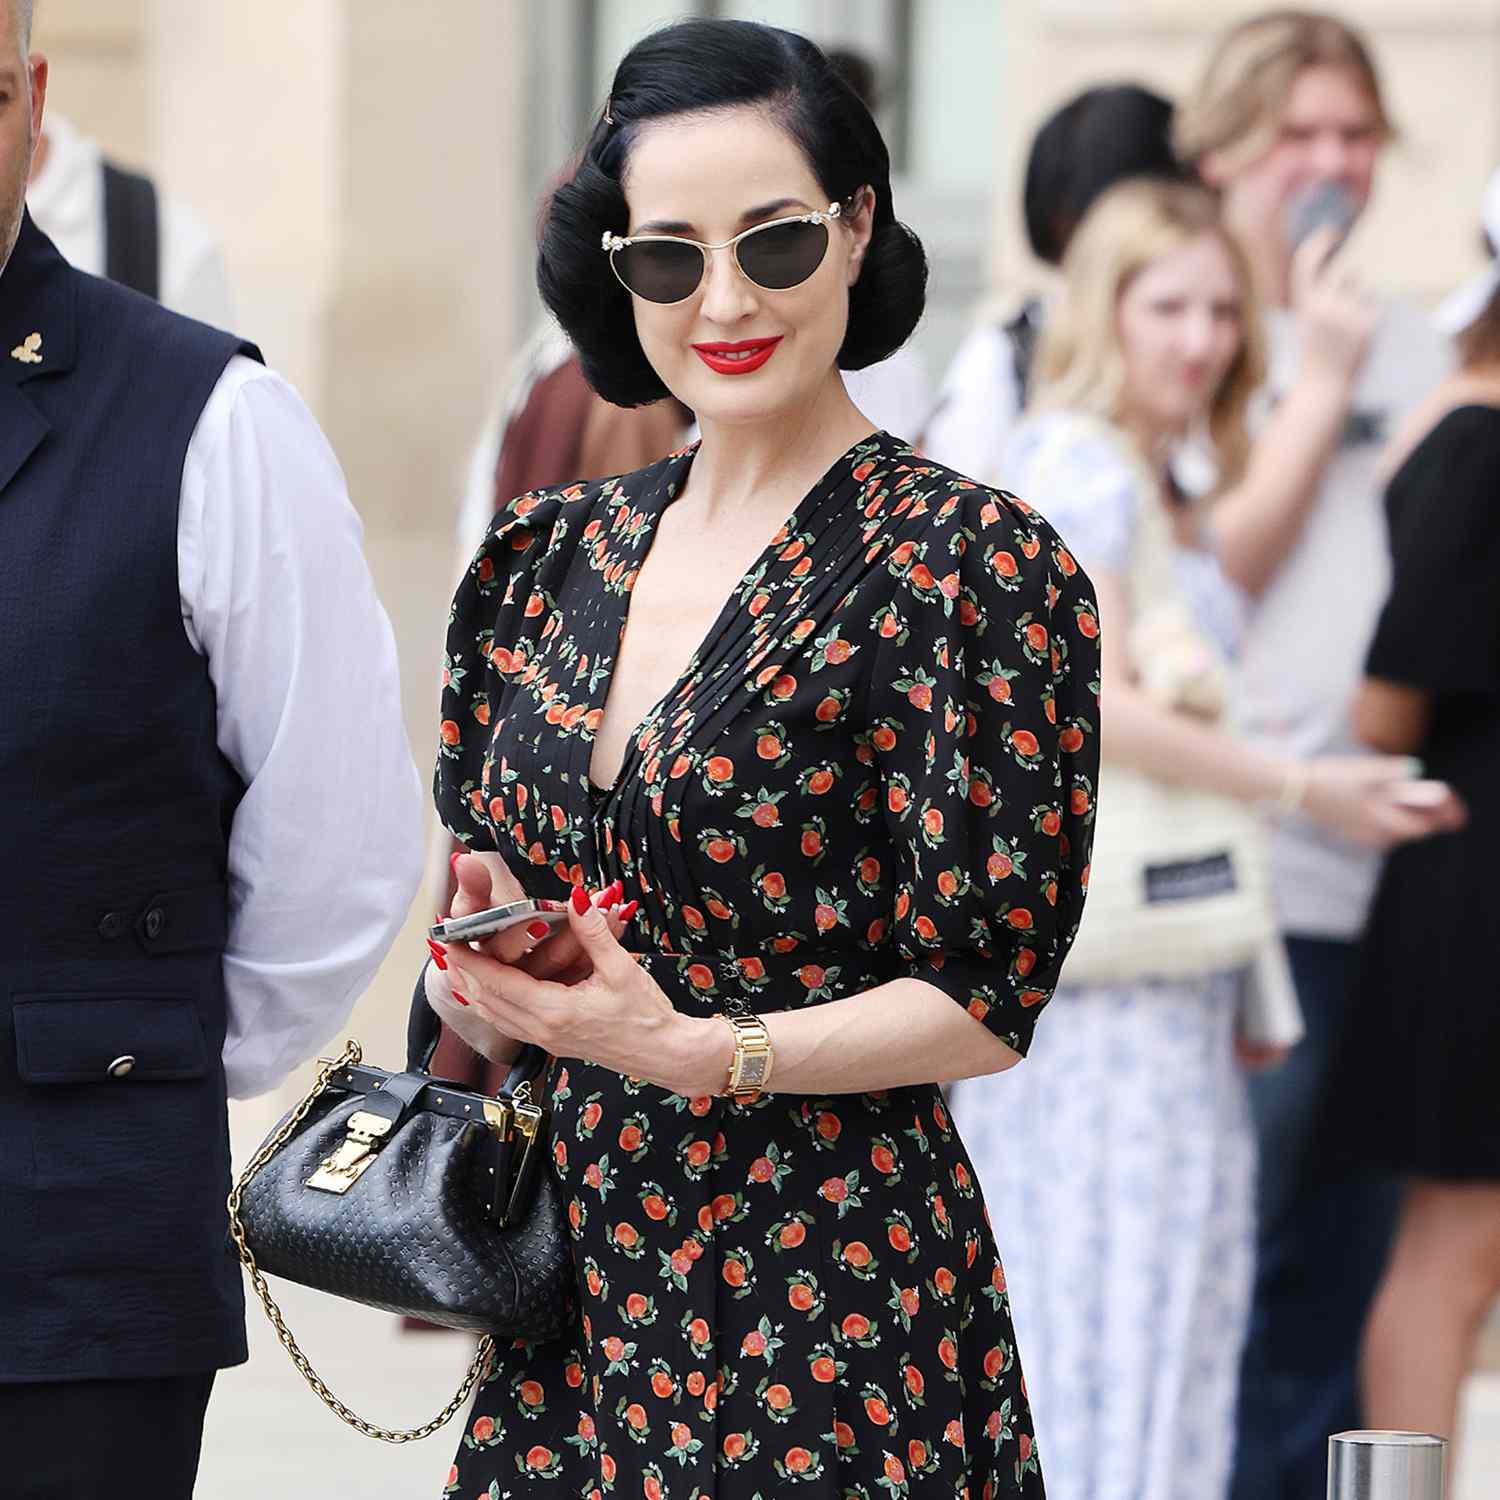 Dita Von Teese is pictured leaving her hotel in Paris this afternoon. Data was seen carrying a Louis Vuitton bag, floral dress and black sunglasses.